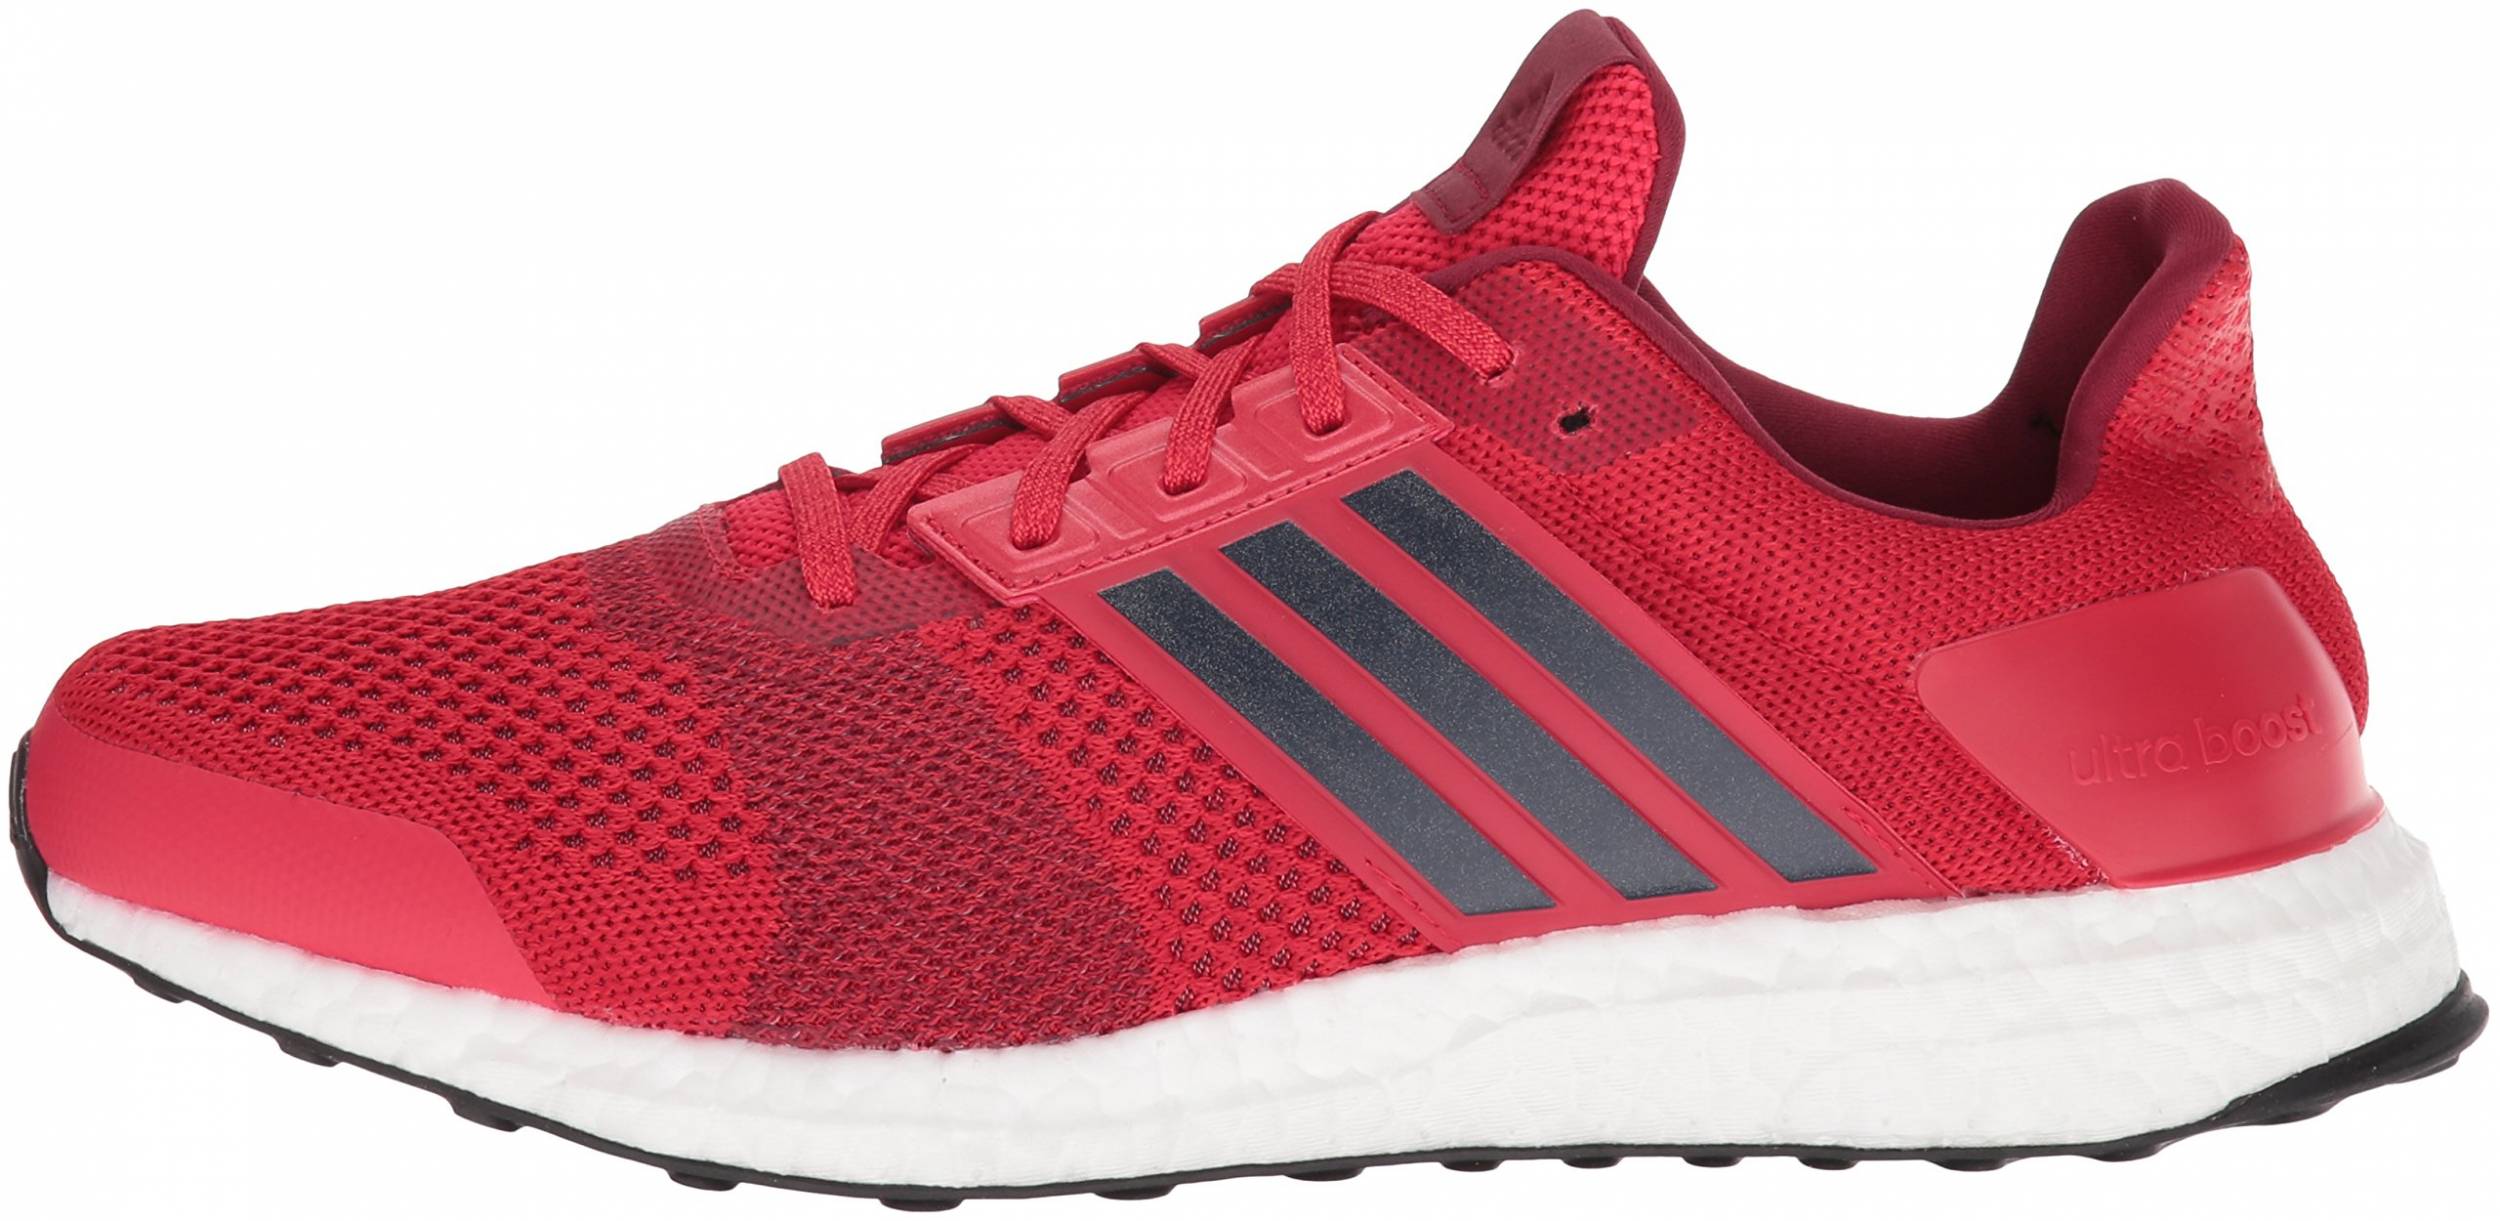 20+ Red Adidas running shoes: Save up 